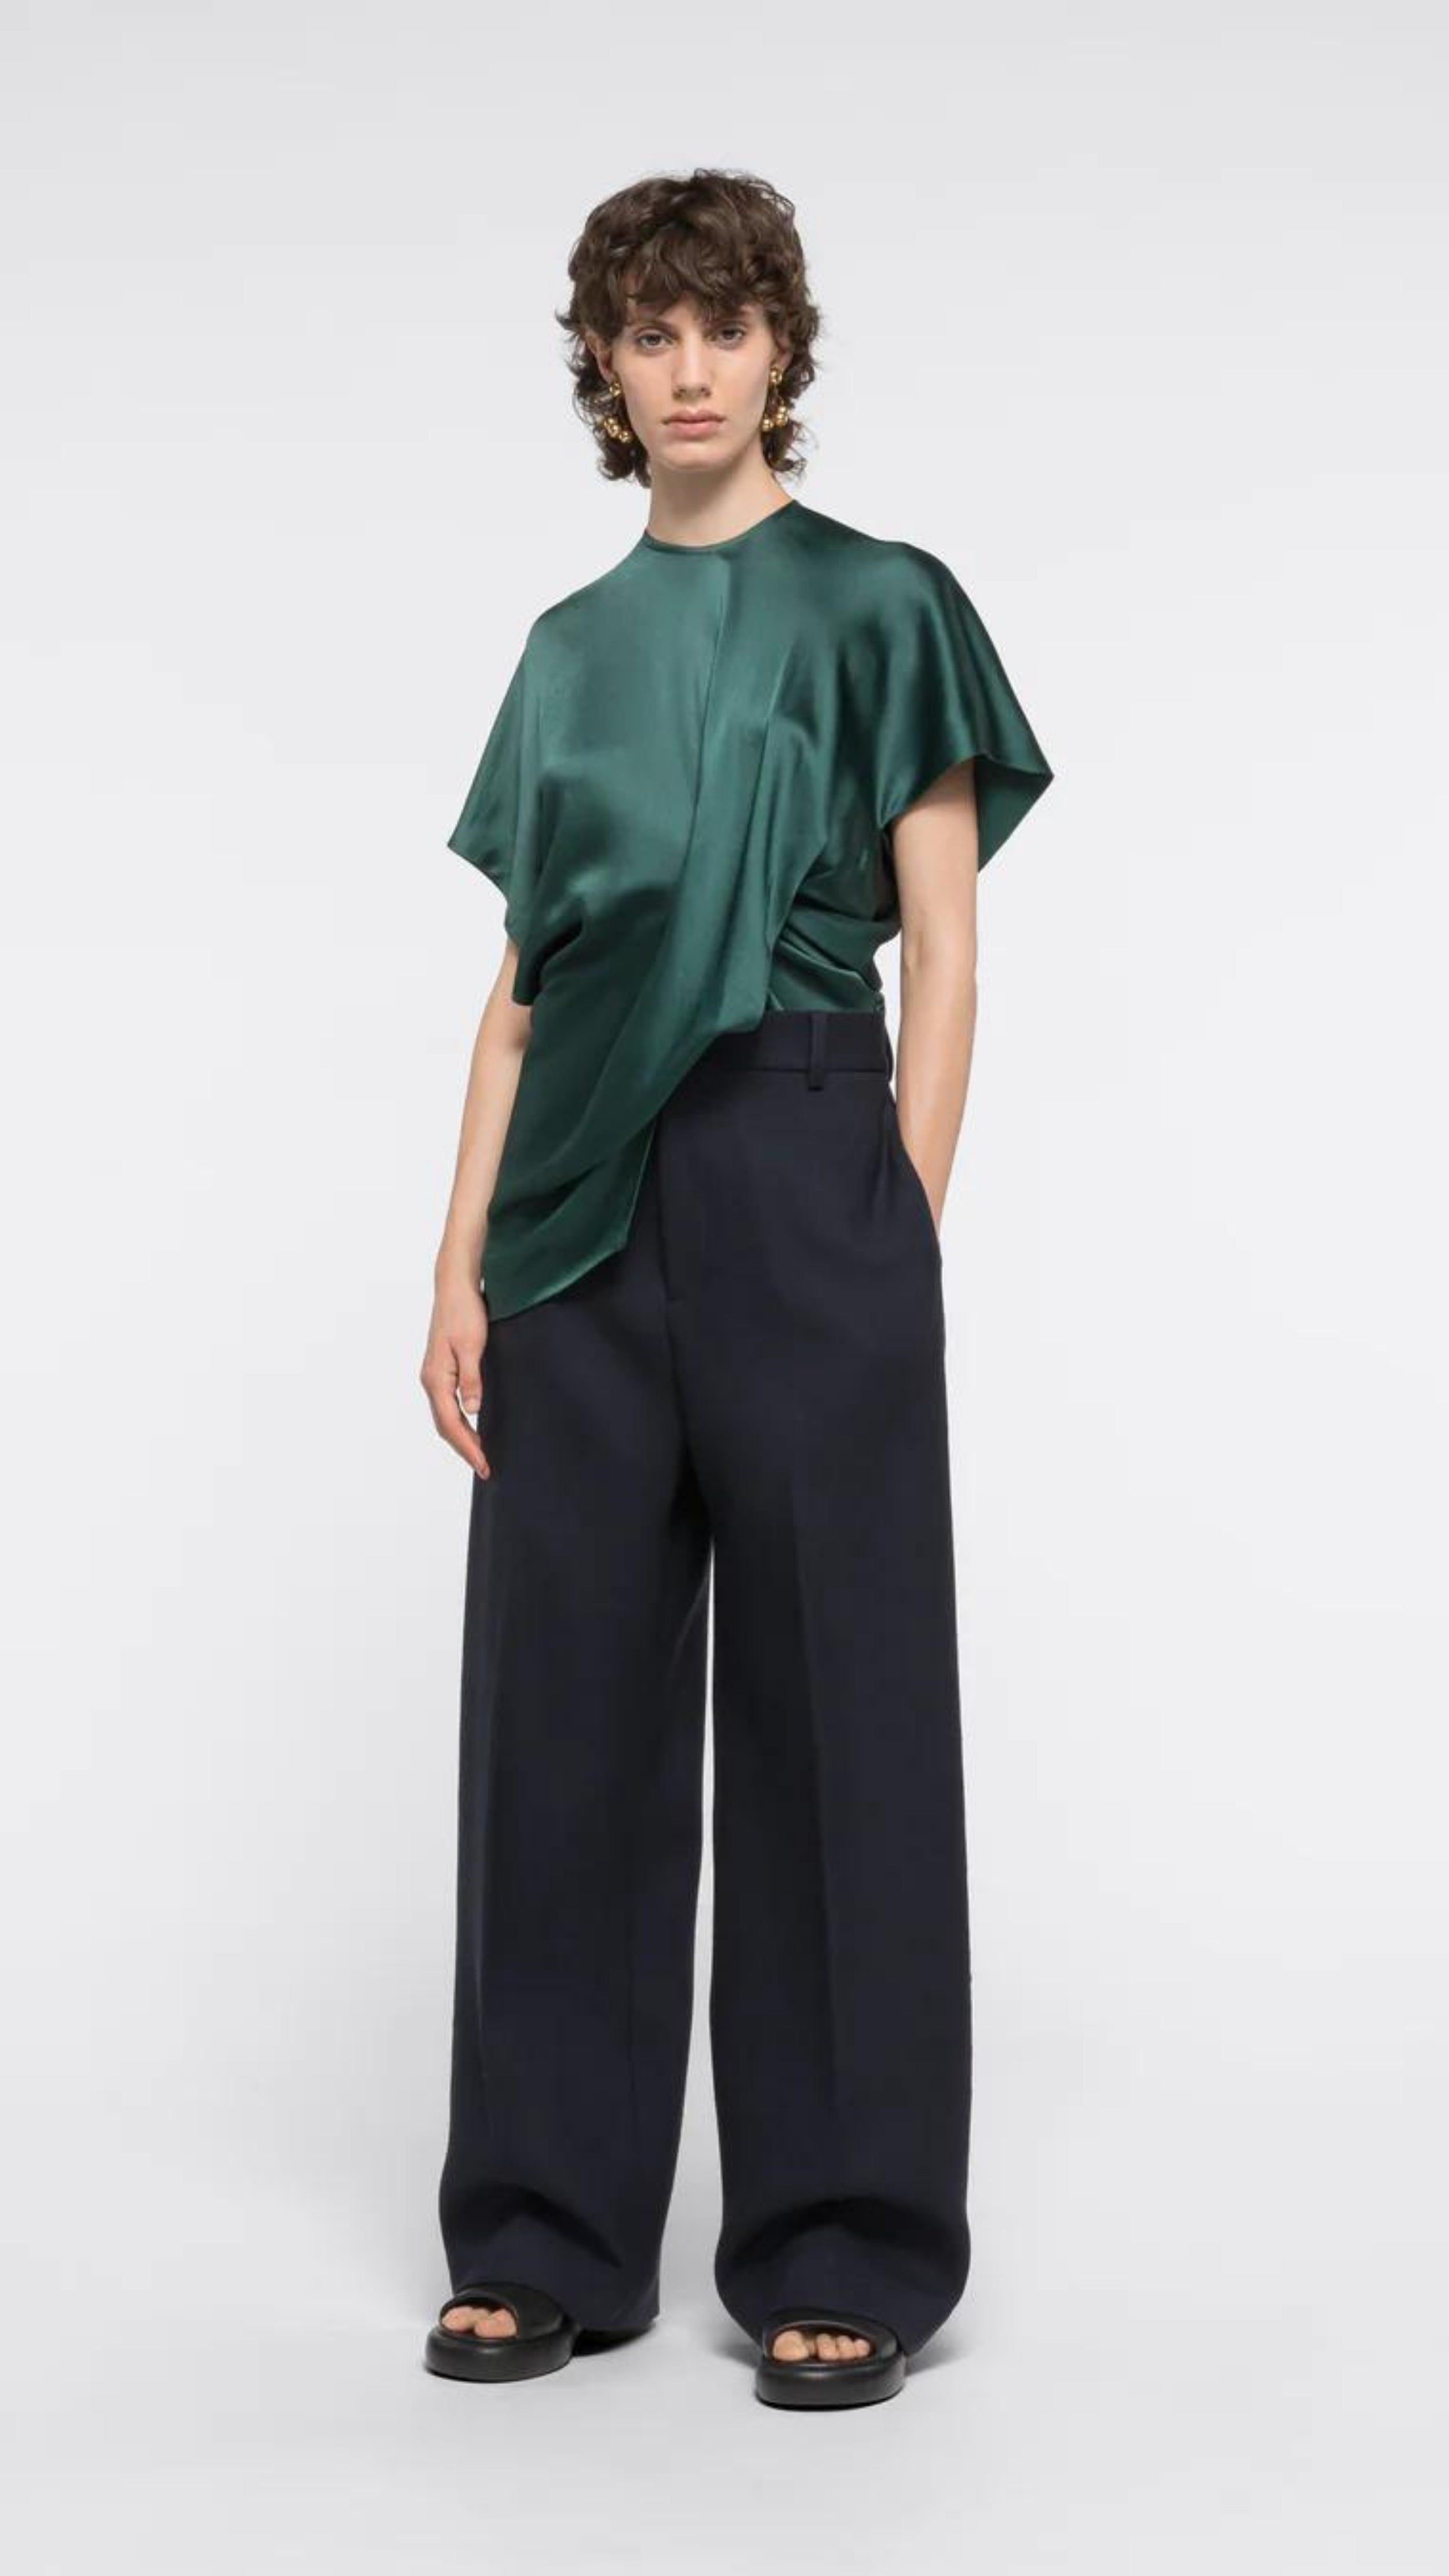 AZ Factory Colville Molly Molloy Lucinda Chambers, Asymmetric Satin Tee Shirt. Elegantly draped in forest green satin material in a classic tee shirt shape. Shown on model facing forward.